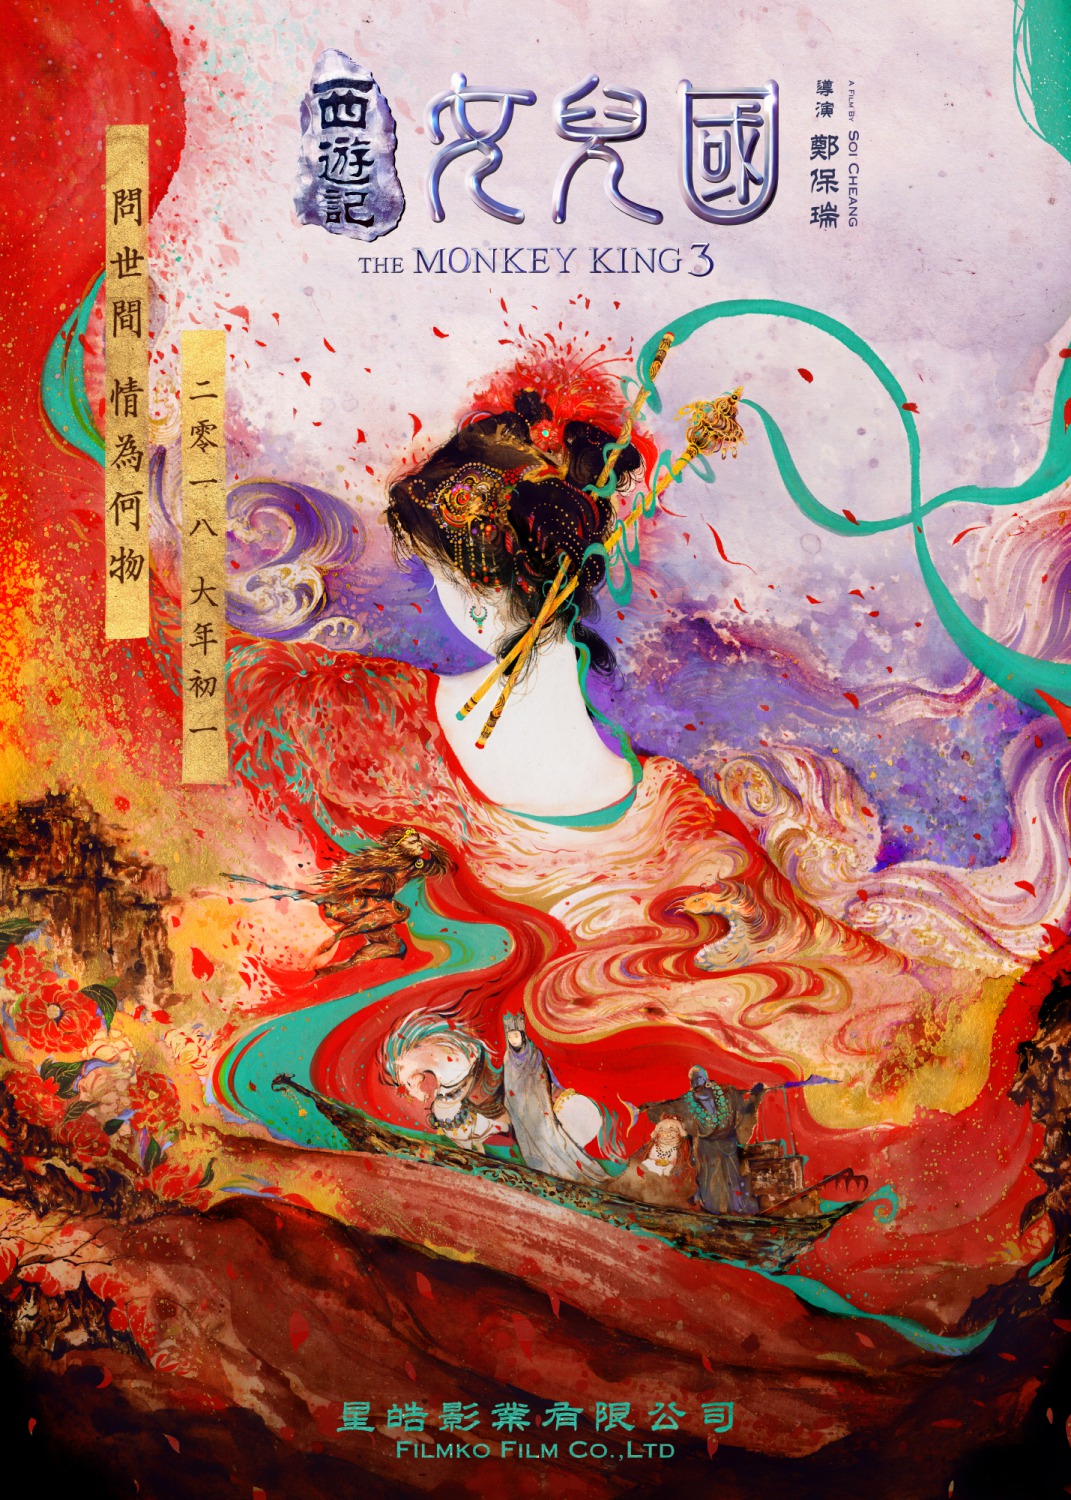 Extra Large Movie Poster Image for The Monkey King 3 (#2 of 2)